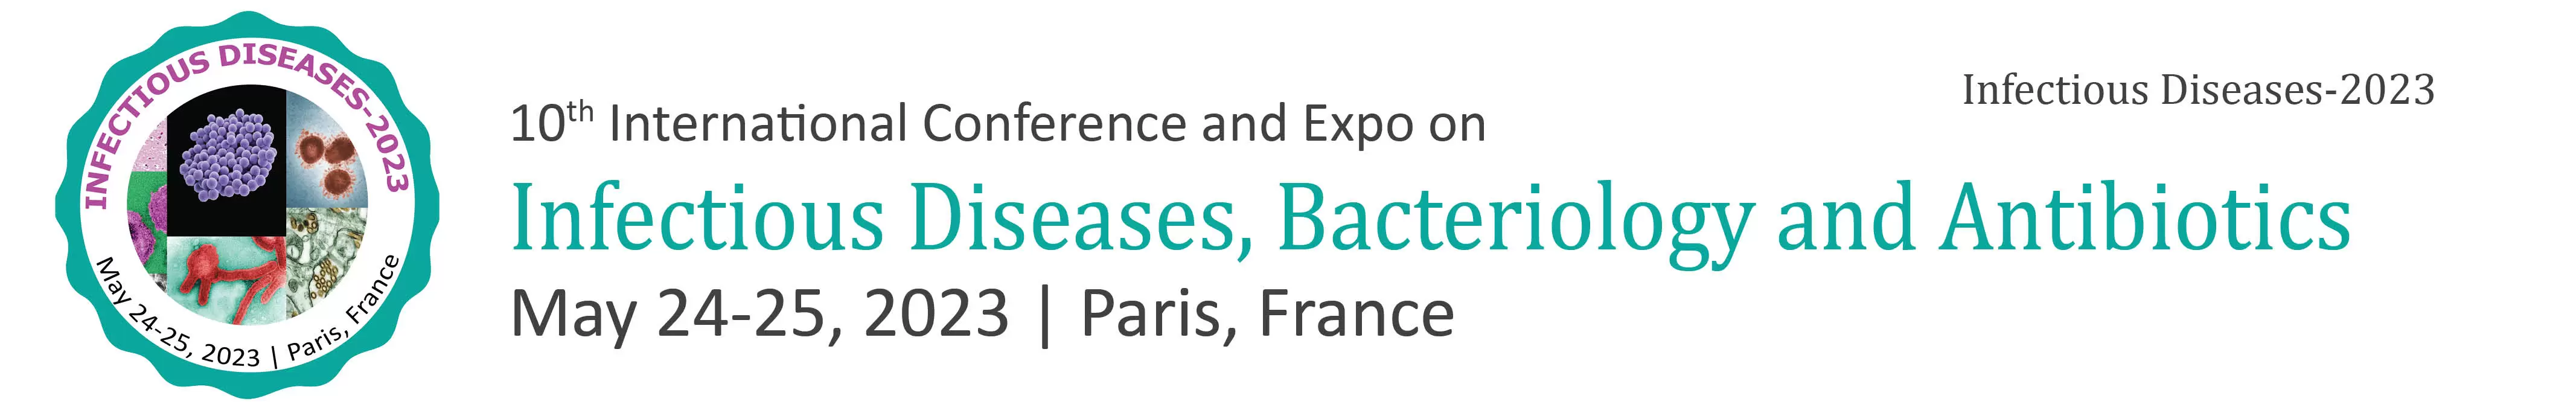 10th InternationalConference on Infectious Diseases, Bacteriology